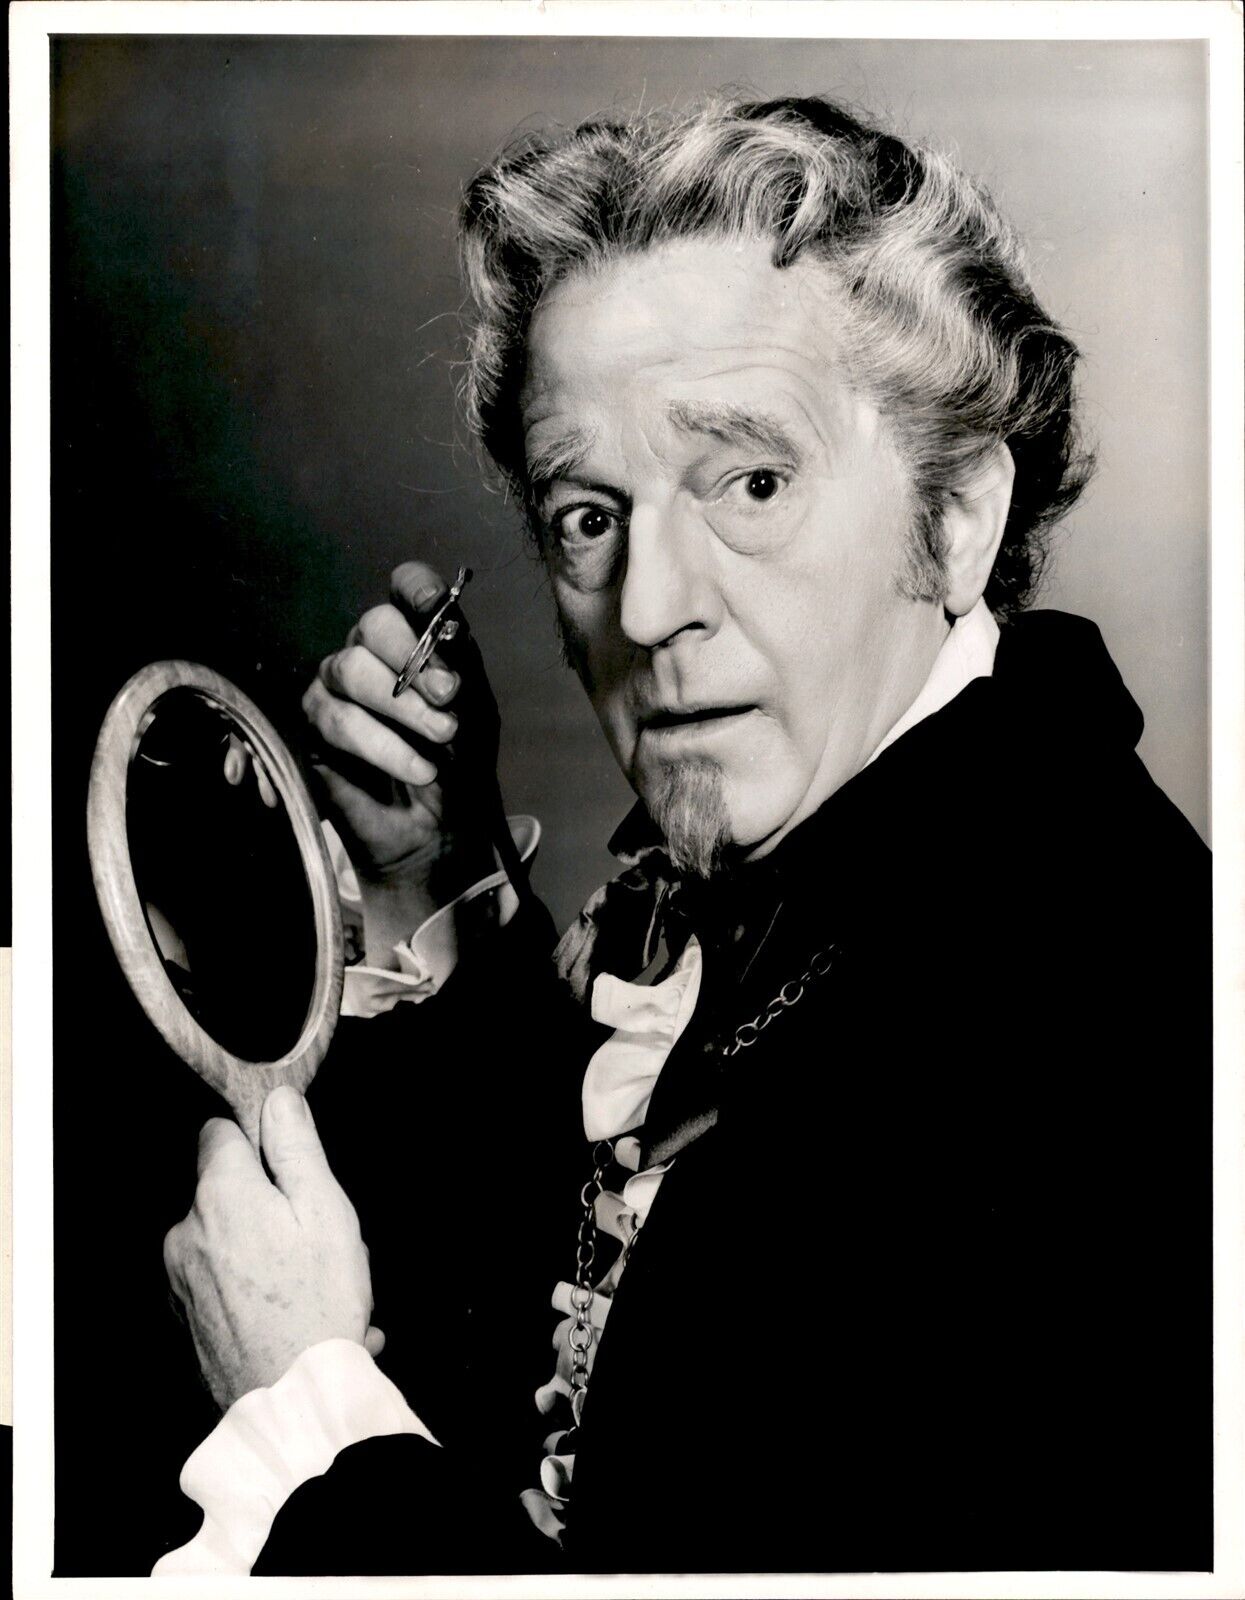 BR44 Rare Original Photo MAURICE EVANS Twelfth Night Actor with Hand Mirror Face